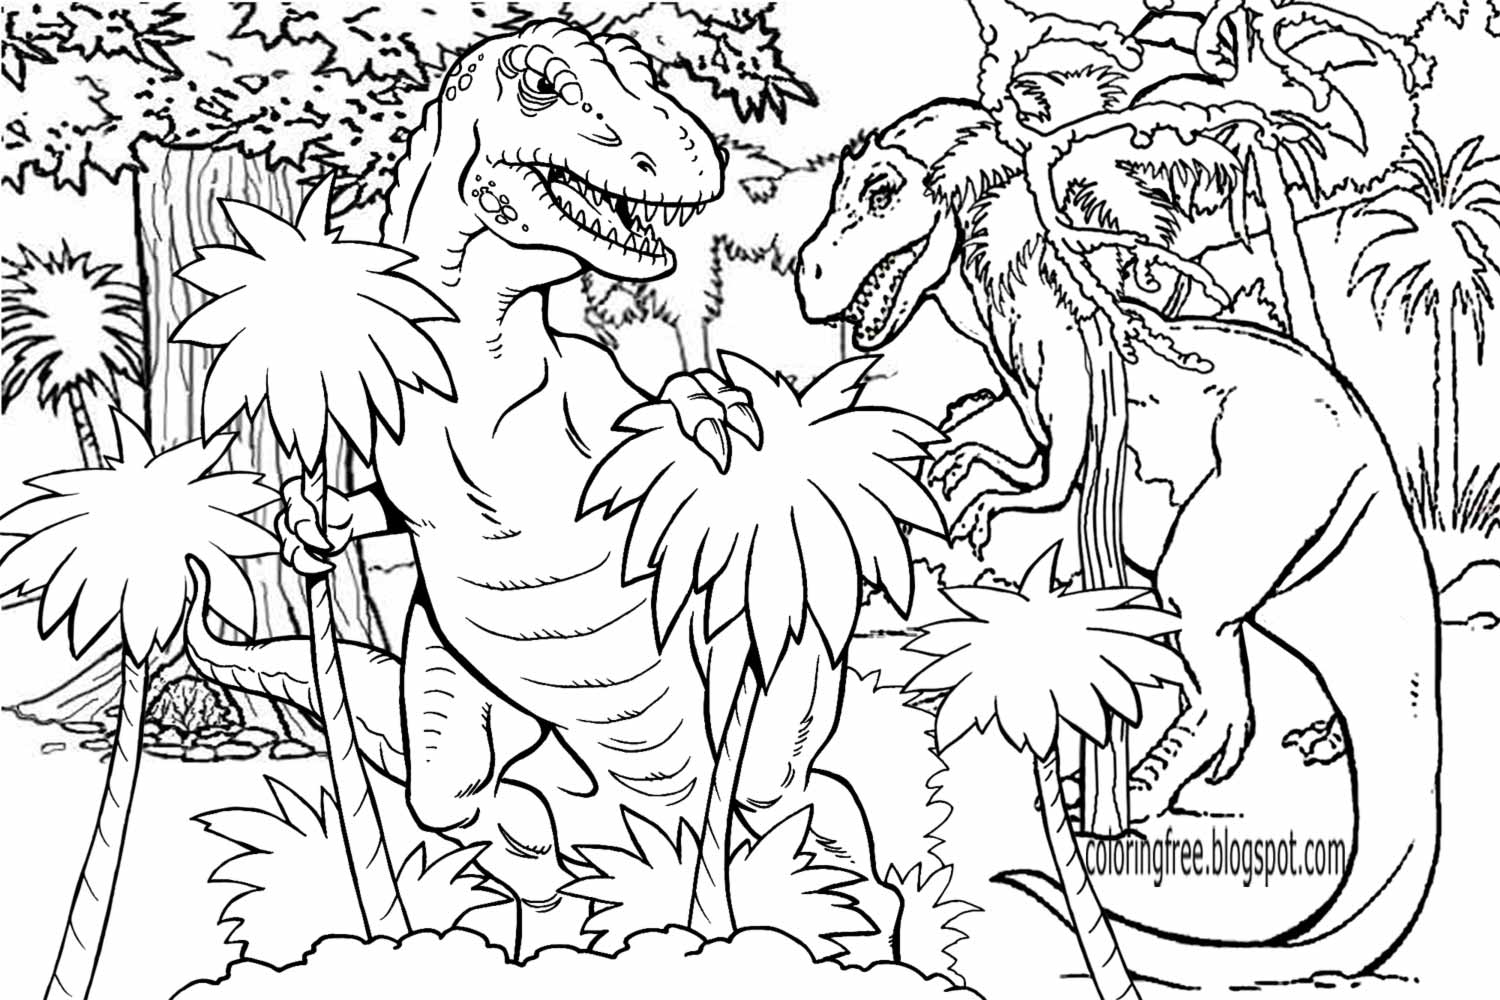 Dinosaur Coloring Pages For Adults at GetDrawings.com | Free ...